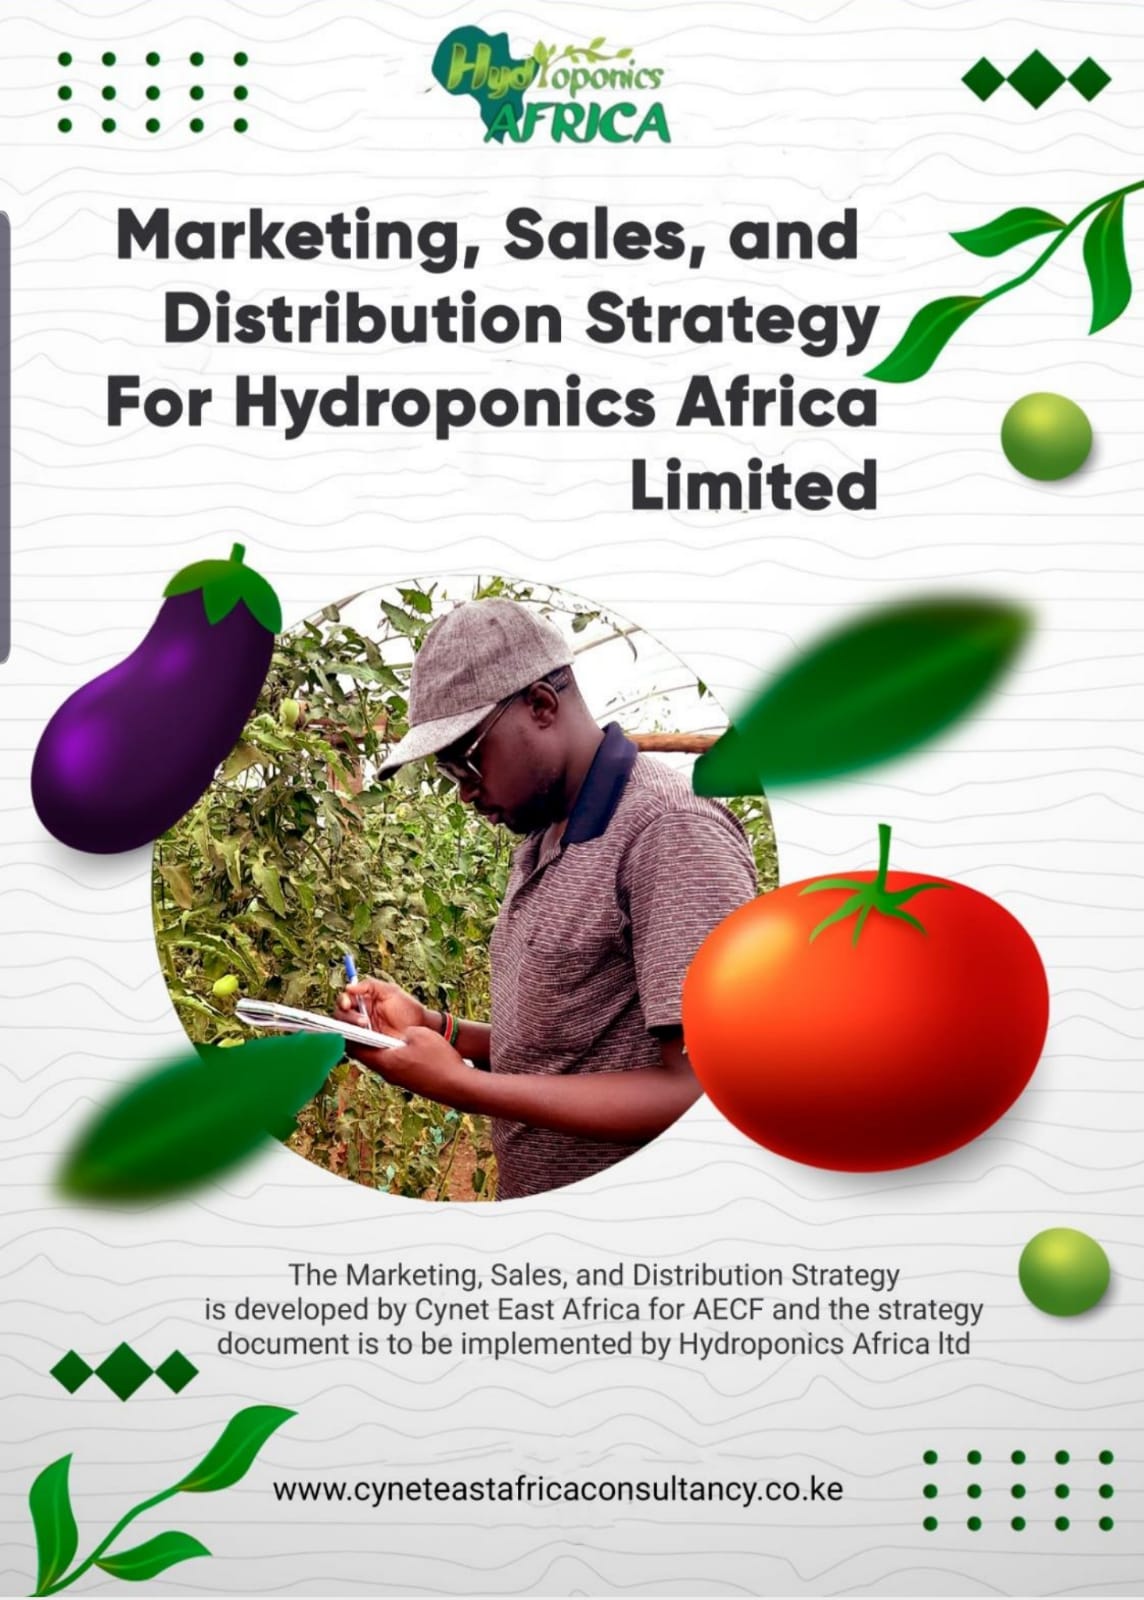 Marketing sales and Distribution Strategy: Hydroponics Africa